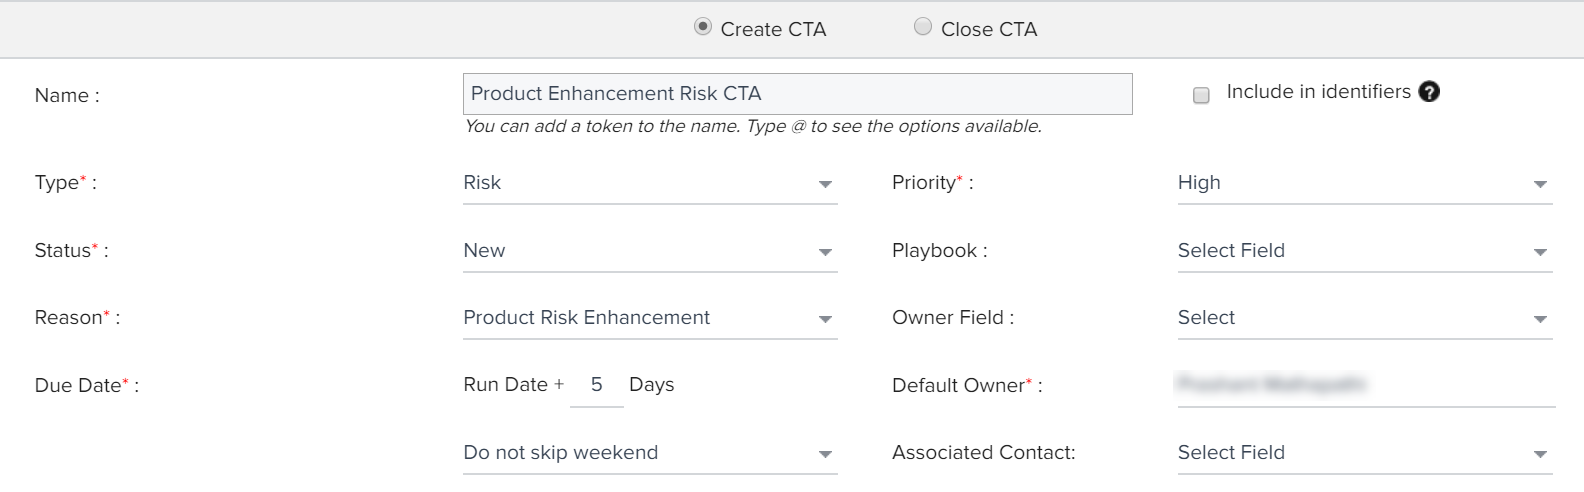 Creating CTA as Rule Action_2.png